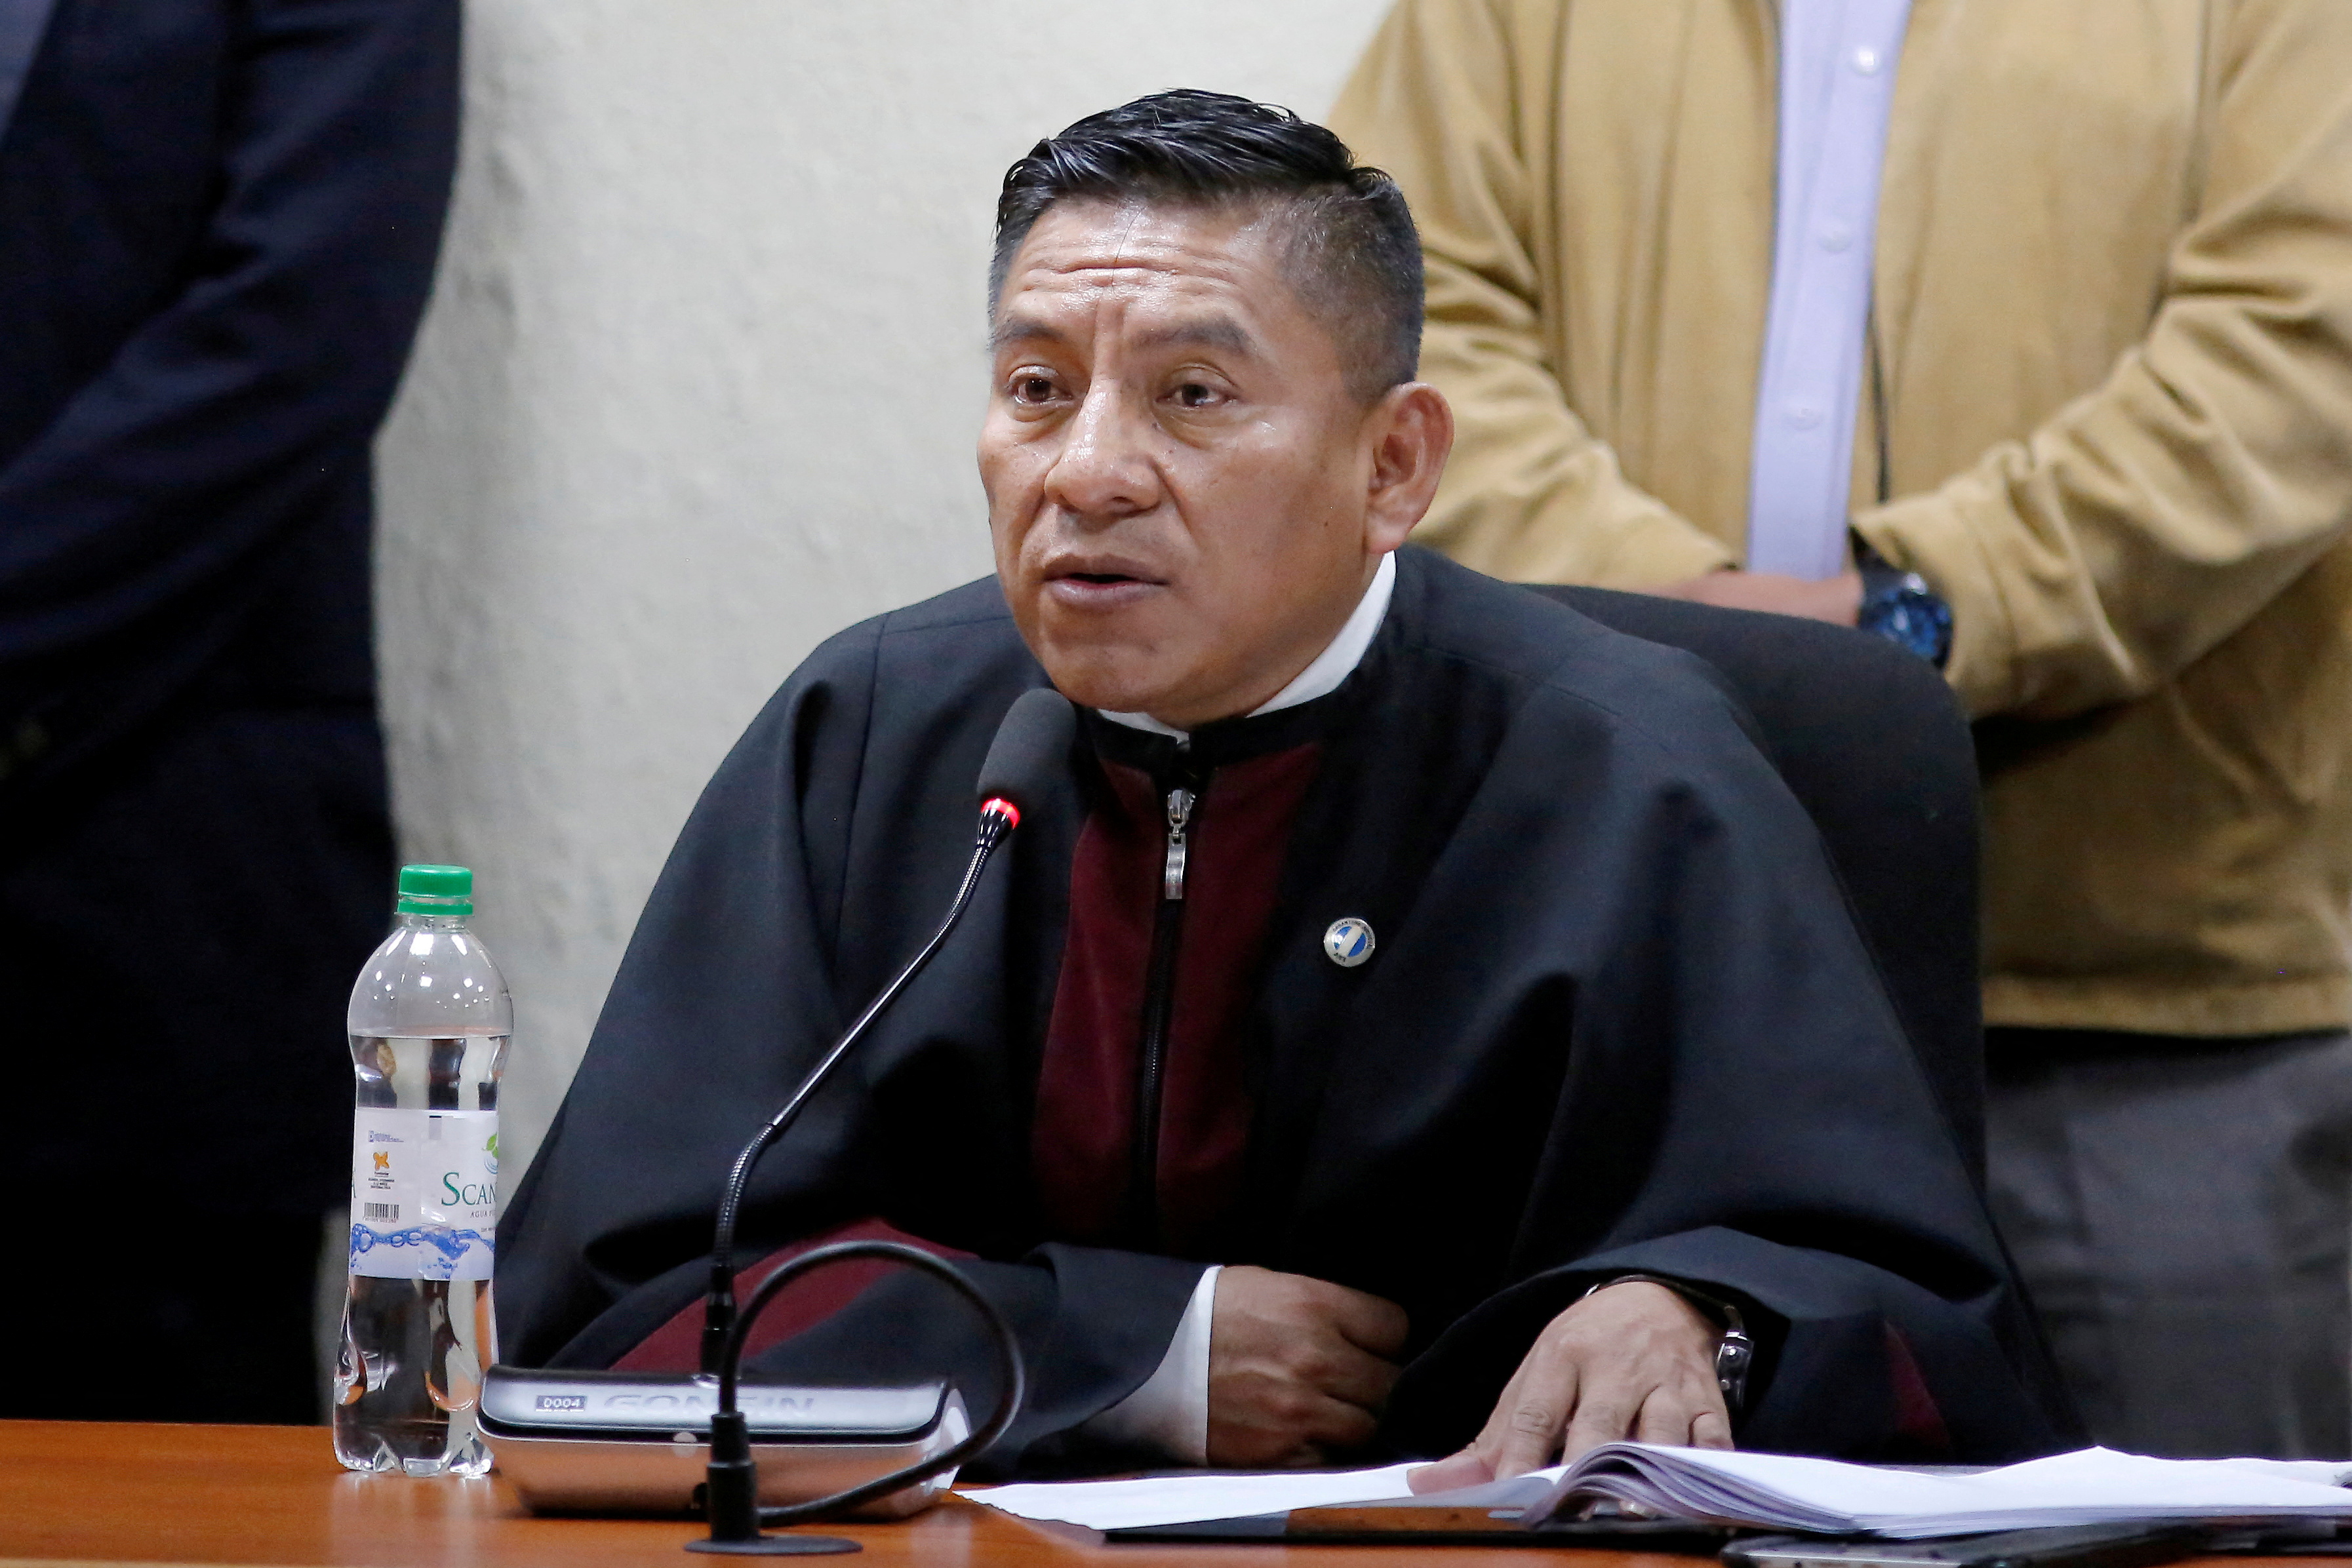 Judge Pablo Xitumul speaks during trial of former Guatemala's Vice-President Baldetti in Guatemala City